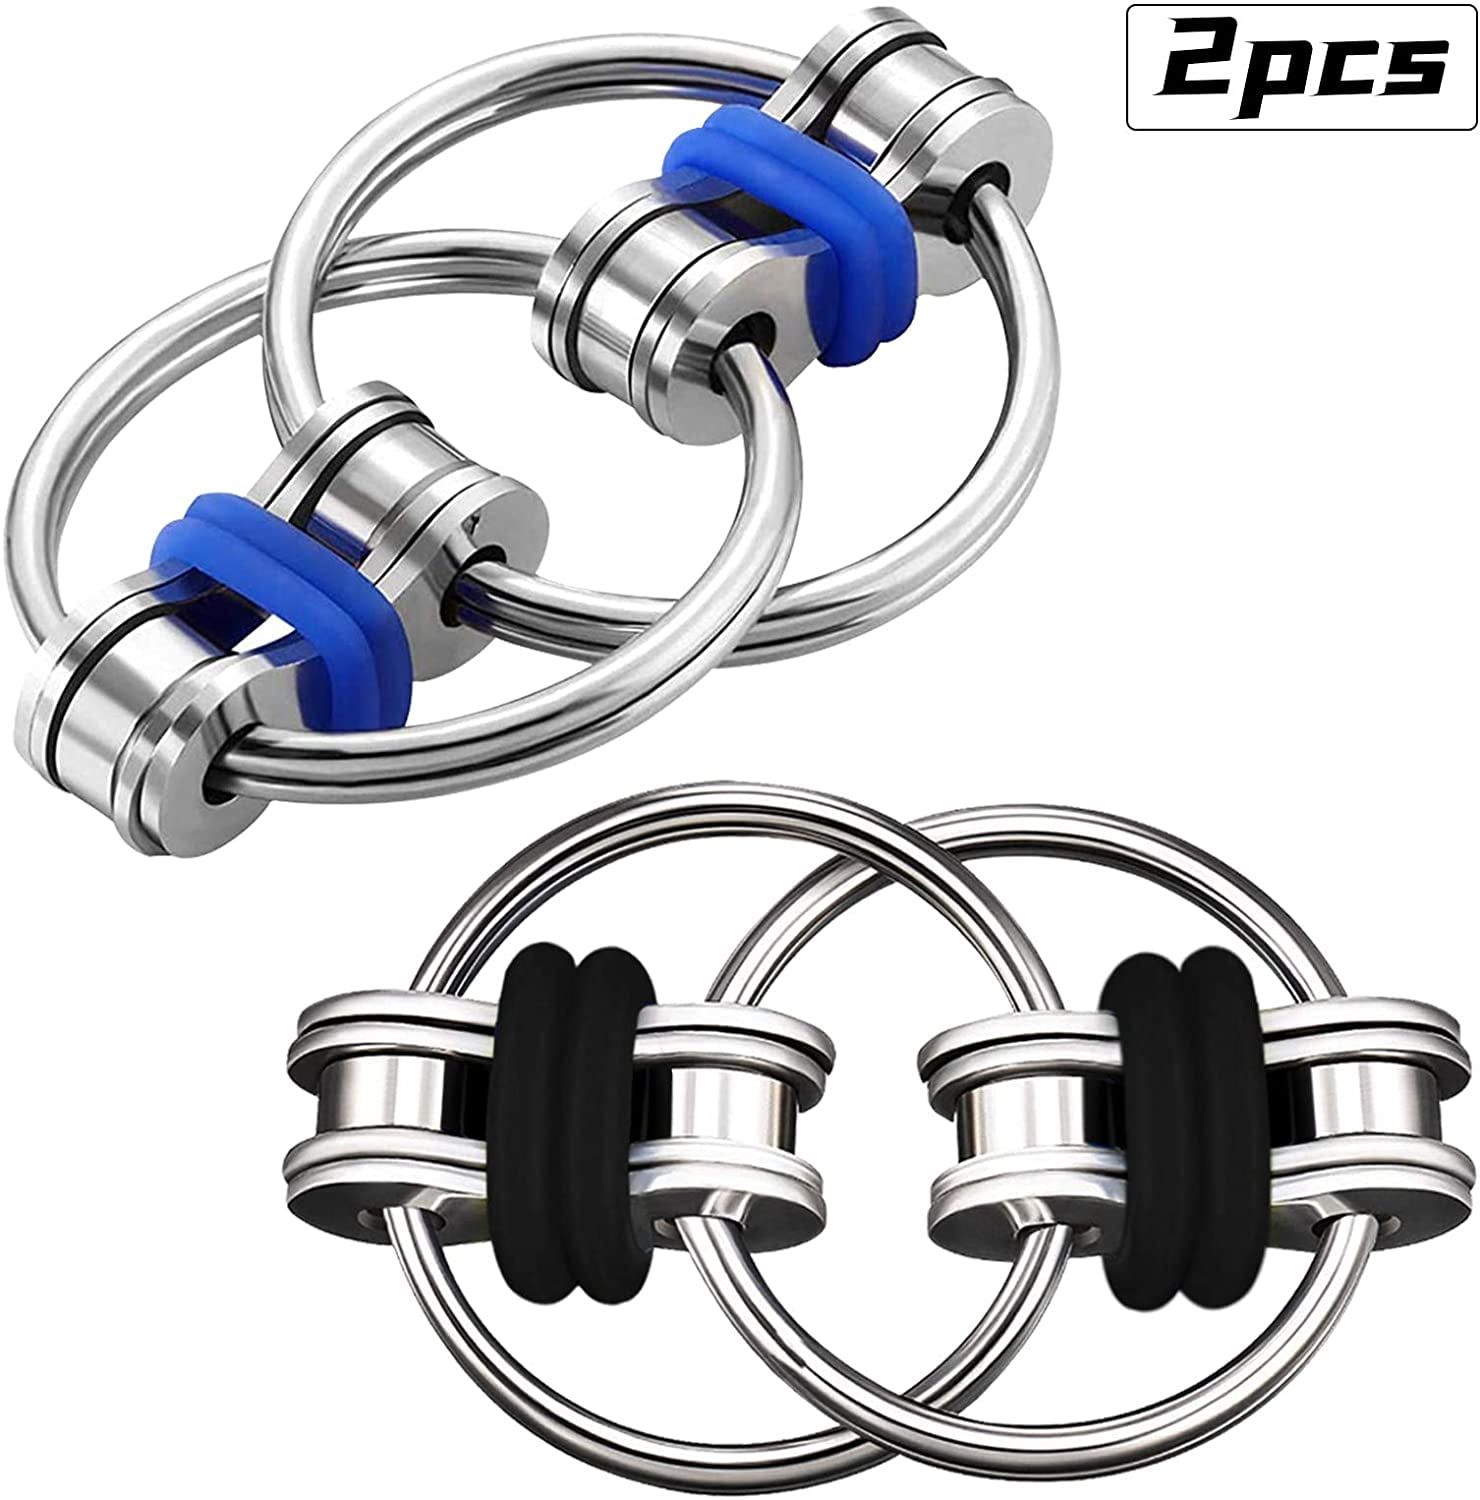 2x Fidget Bike Chain Ring Finger Spinner Stress Relief ADHD Sensory Autism Toys 